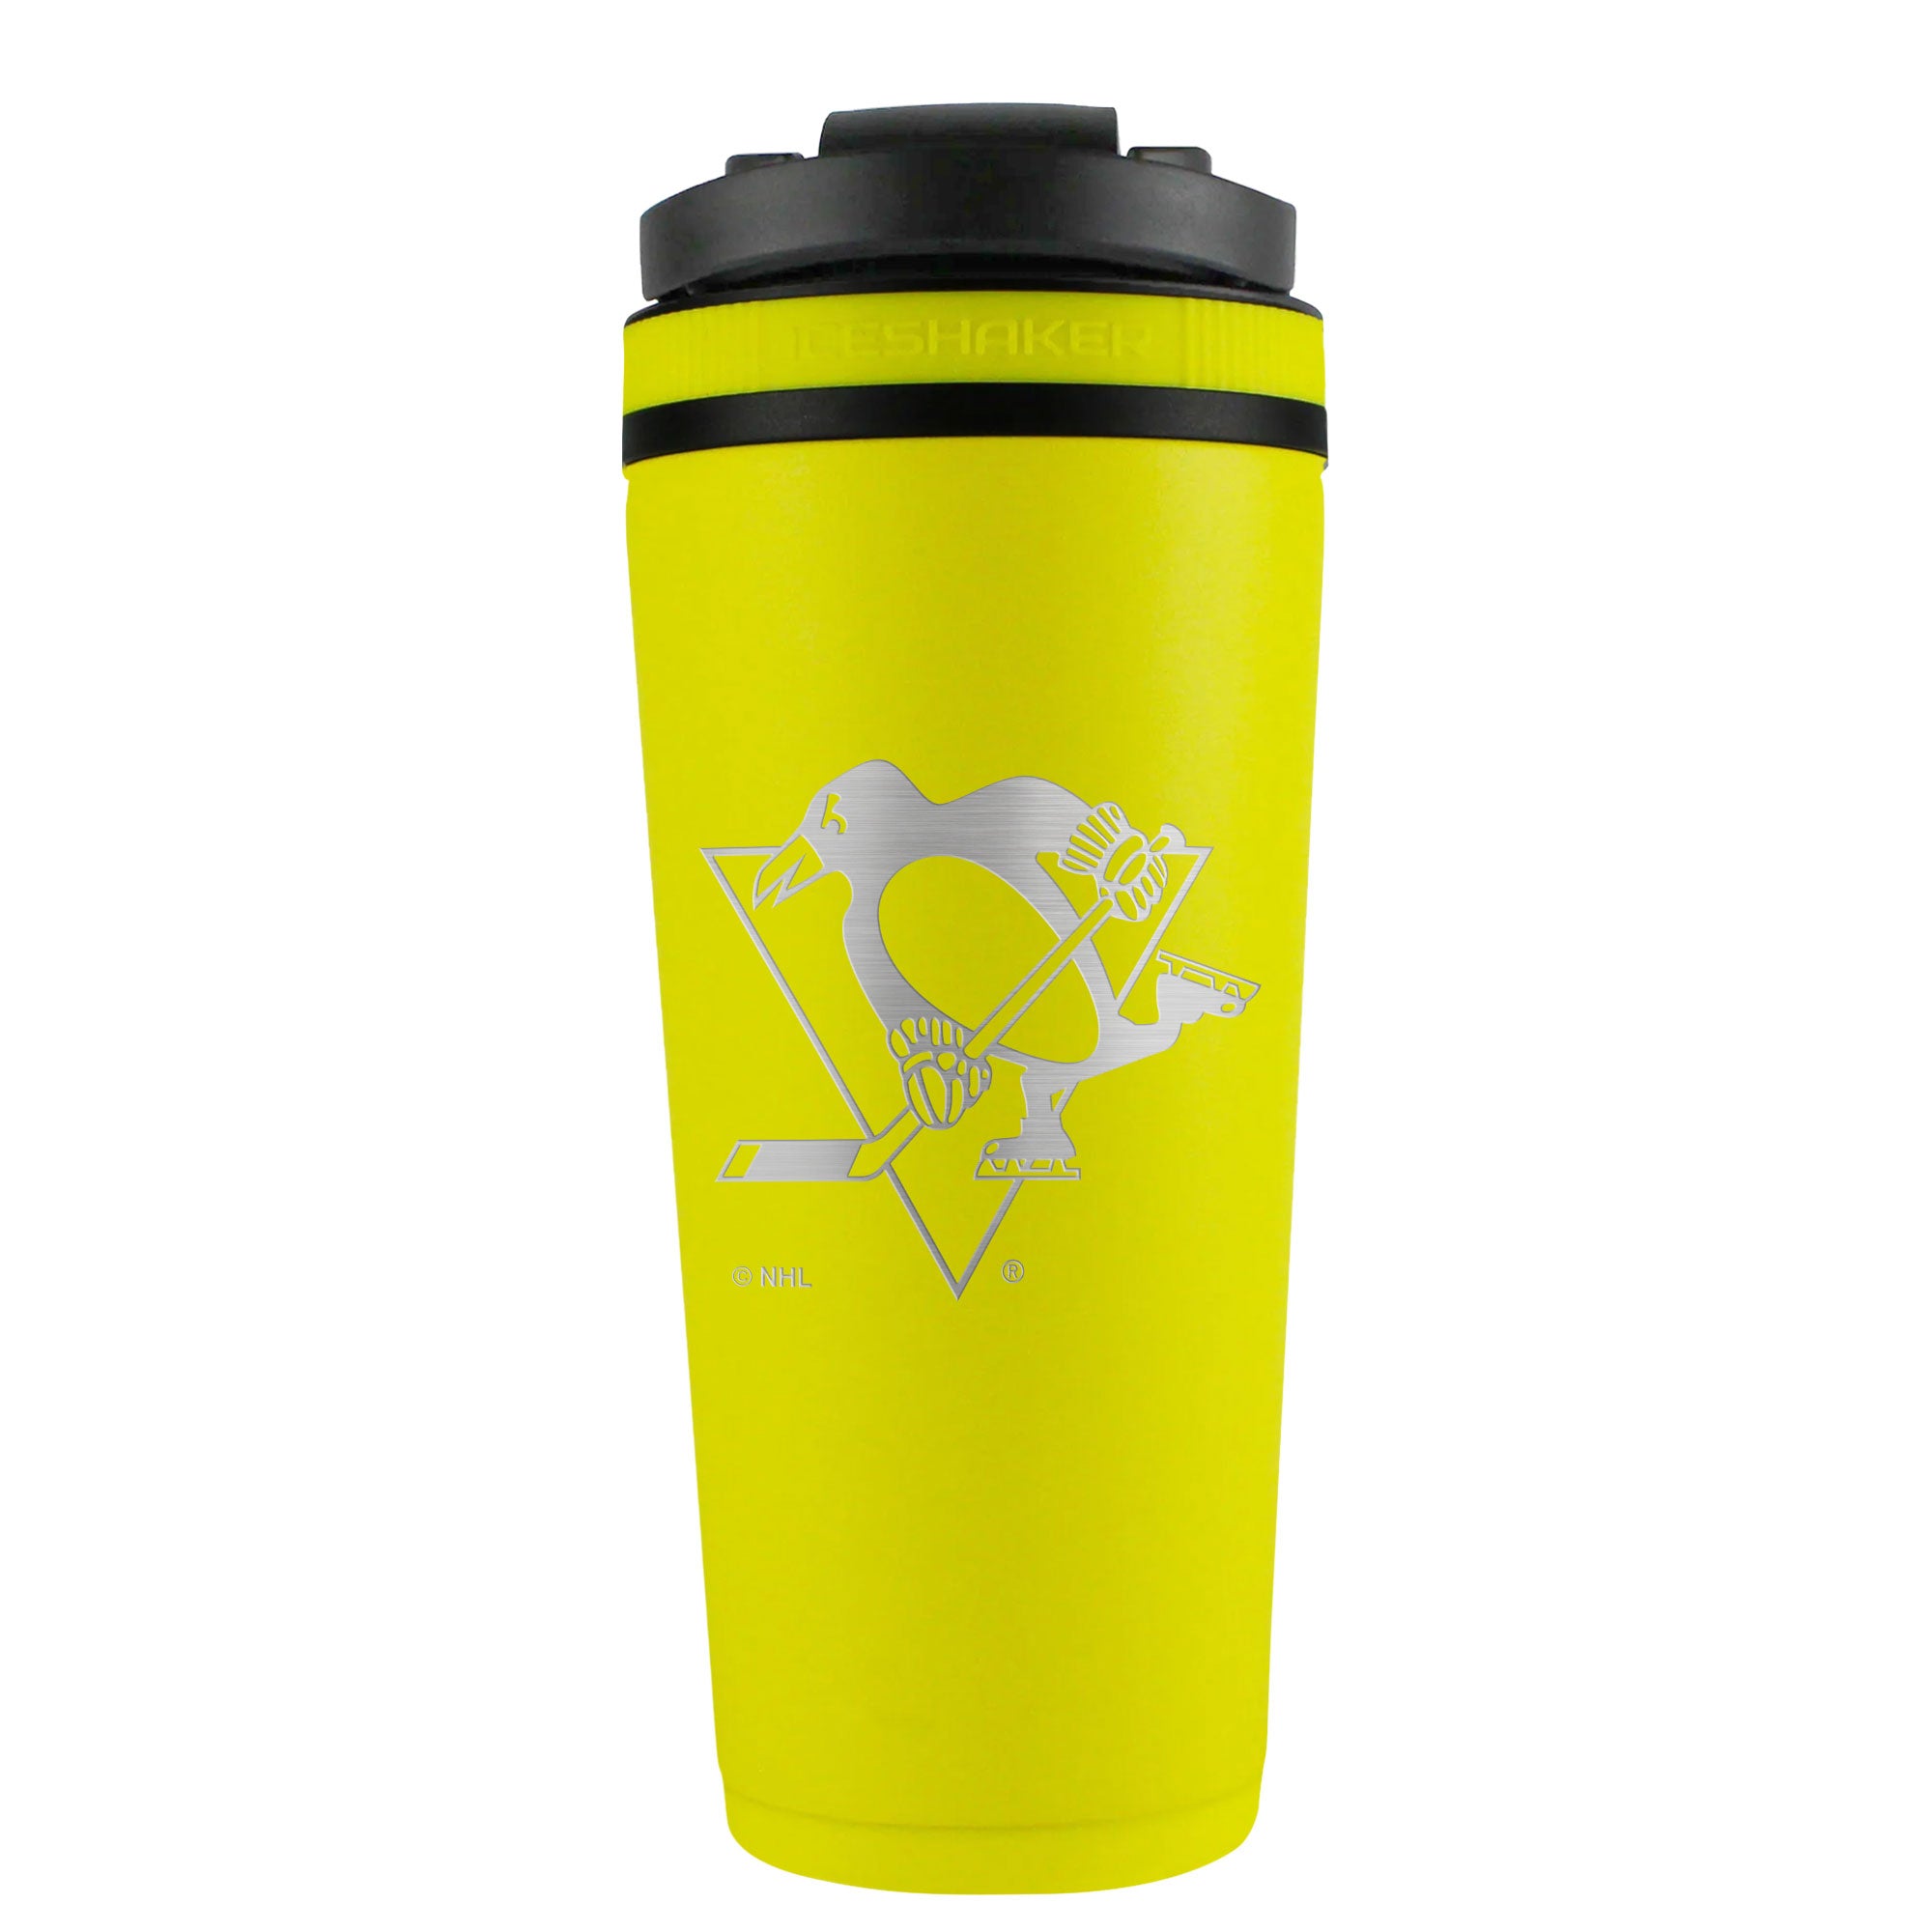 Officially Licensed Pittsburgh Penguins 26oz Ice Shaker - Yellow